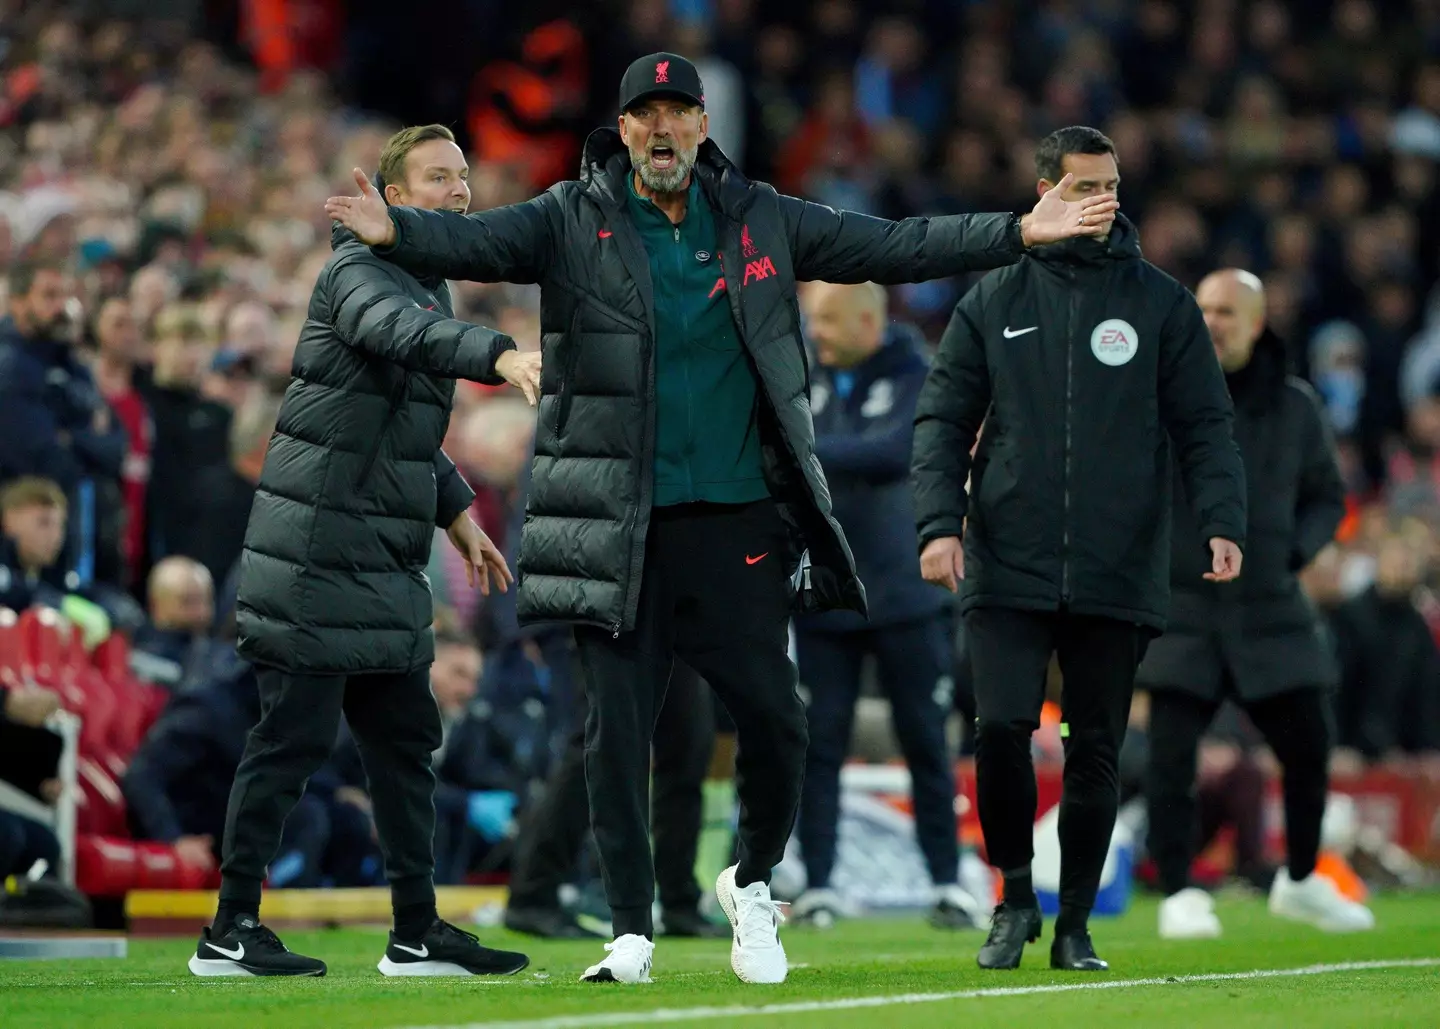 Klopp was sent off against Manchester City on Sunday (Image: Alamy)